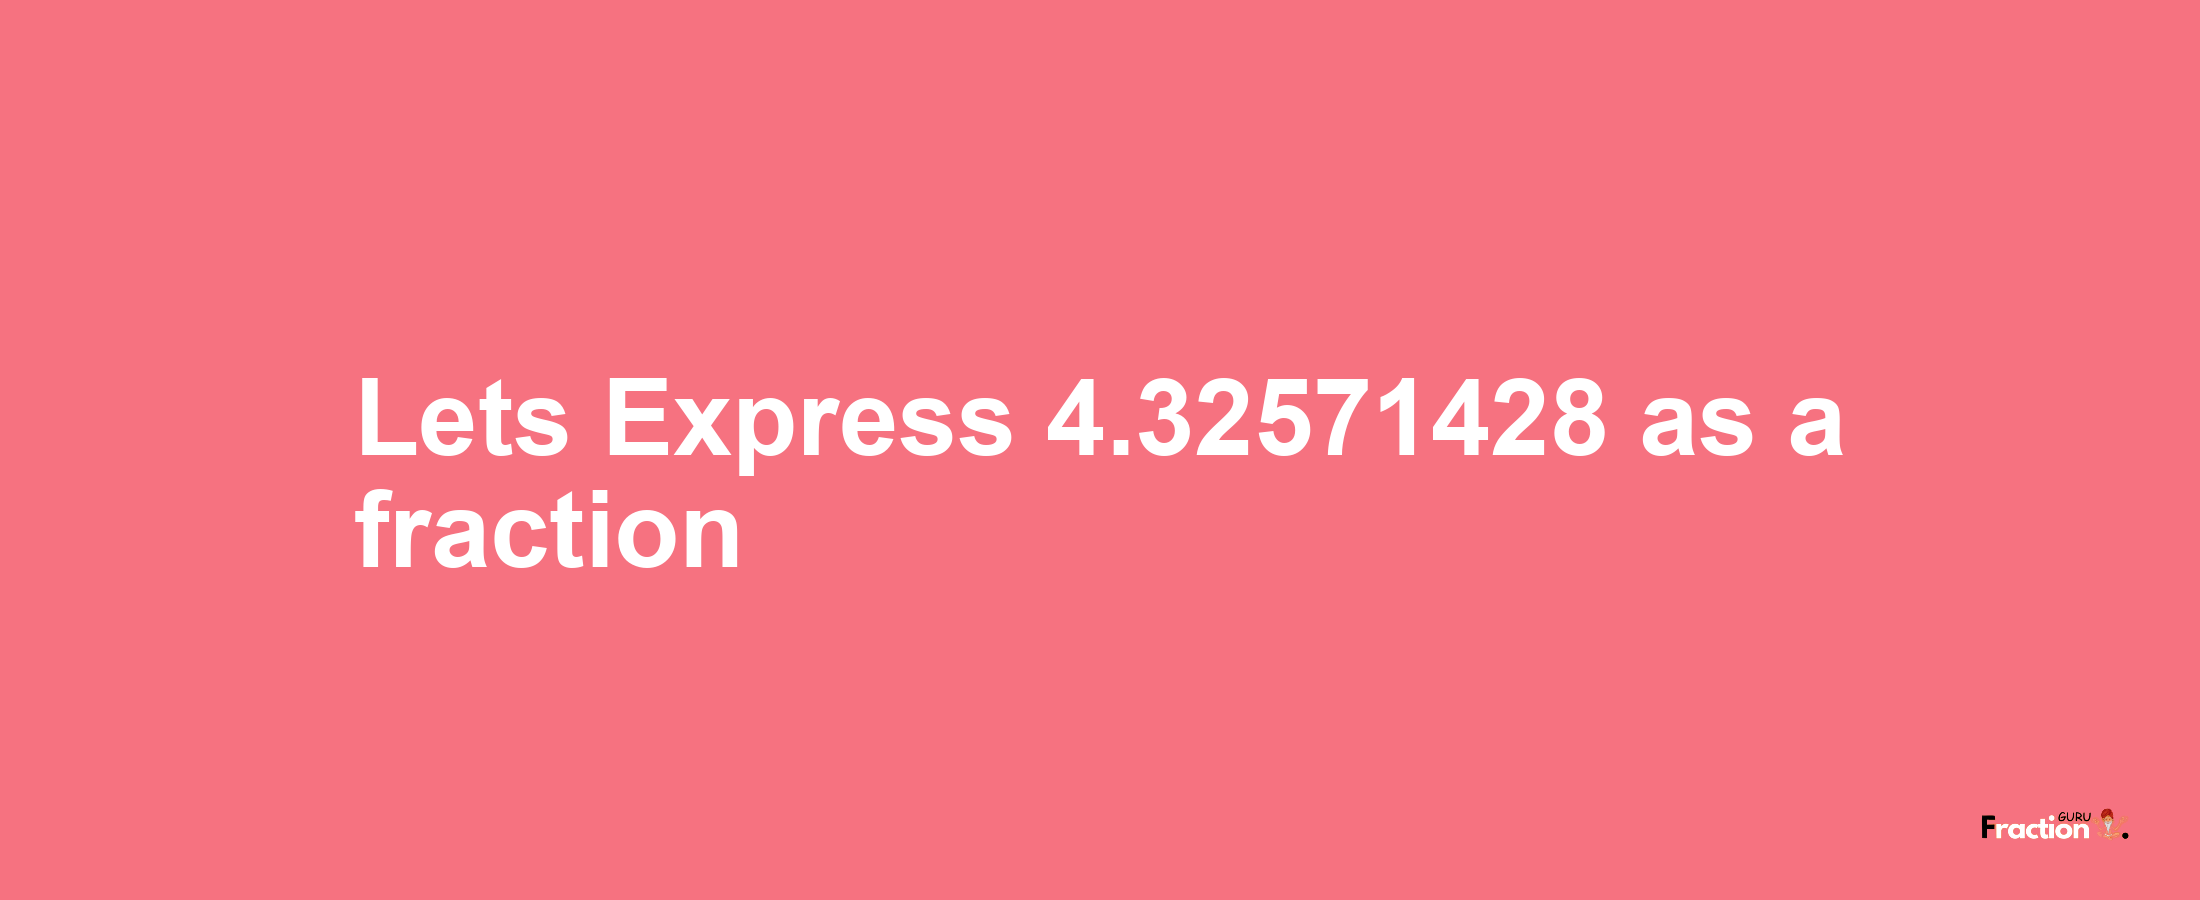 Lets Express 4.32571428 as afraction